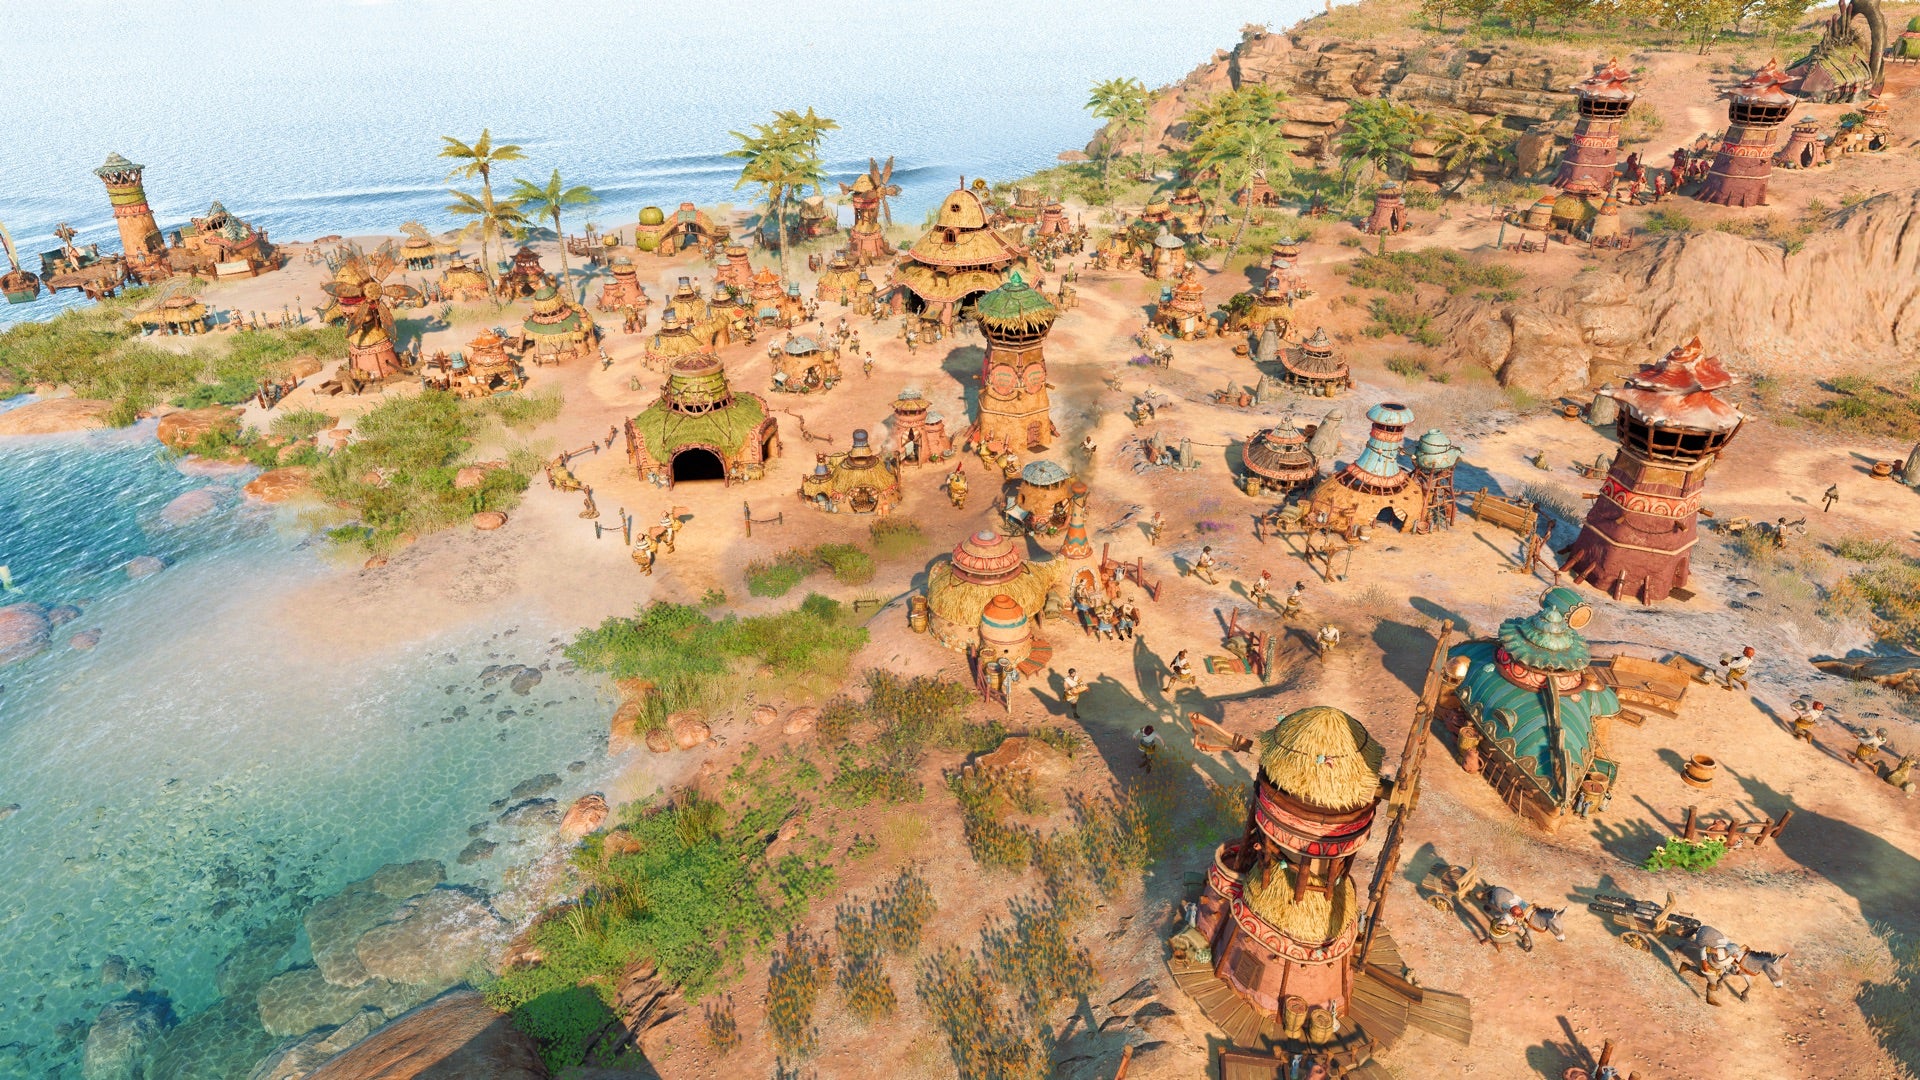 Image for Ubisoft's much-delayed The Settlers reboot now aiming for February 2023 release on PC